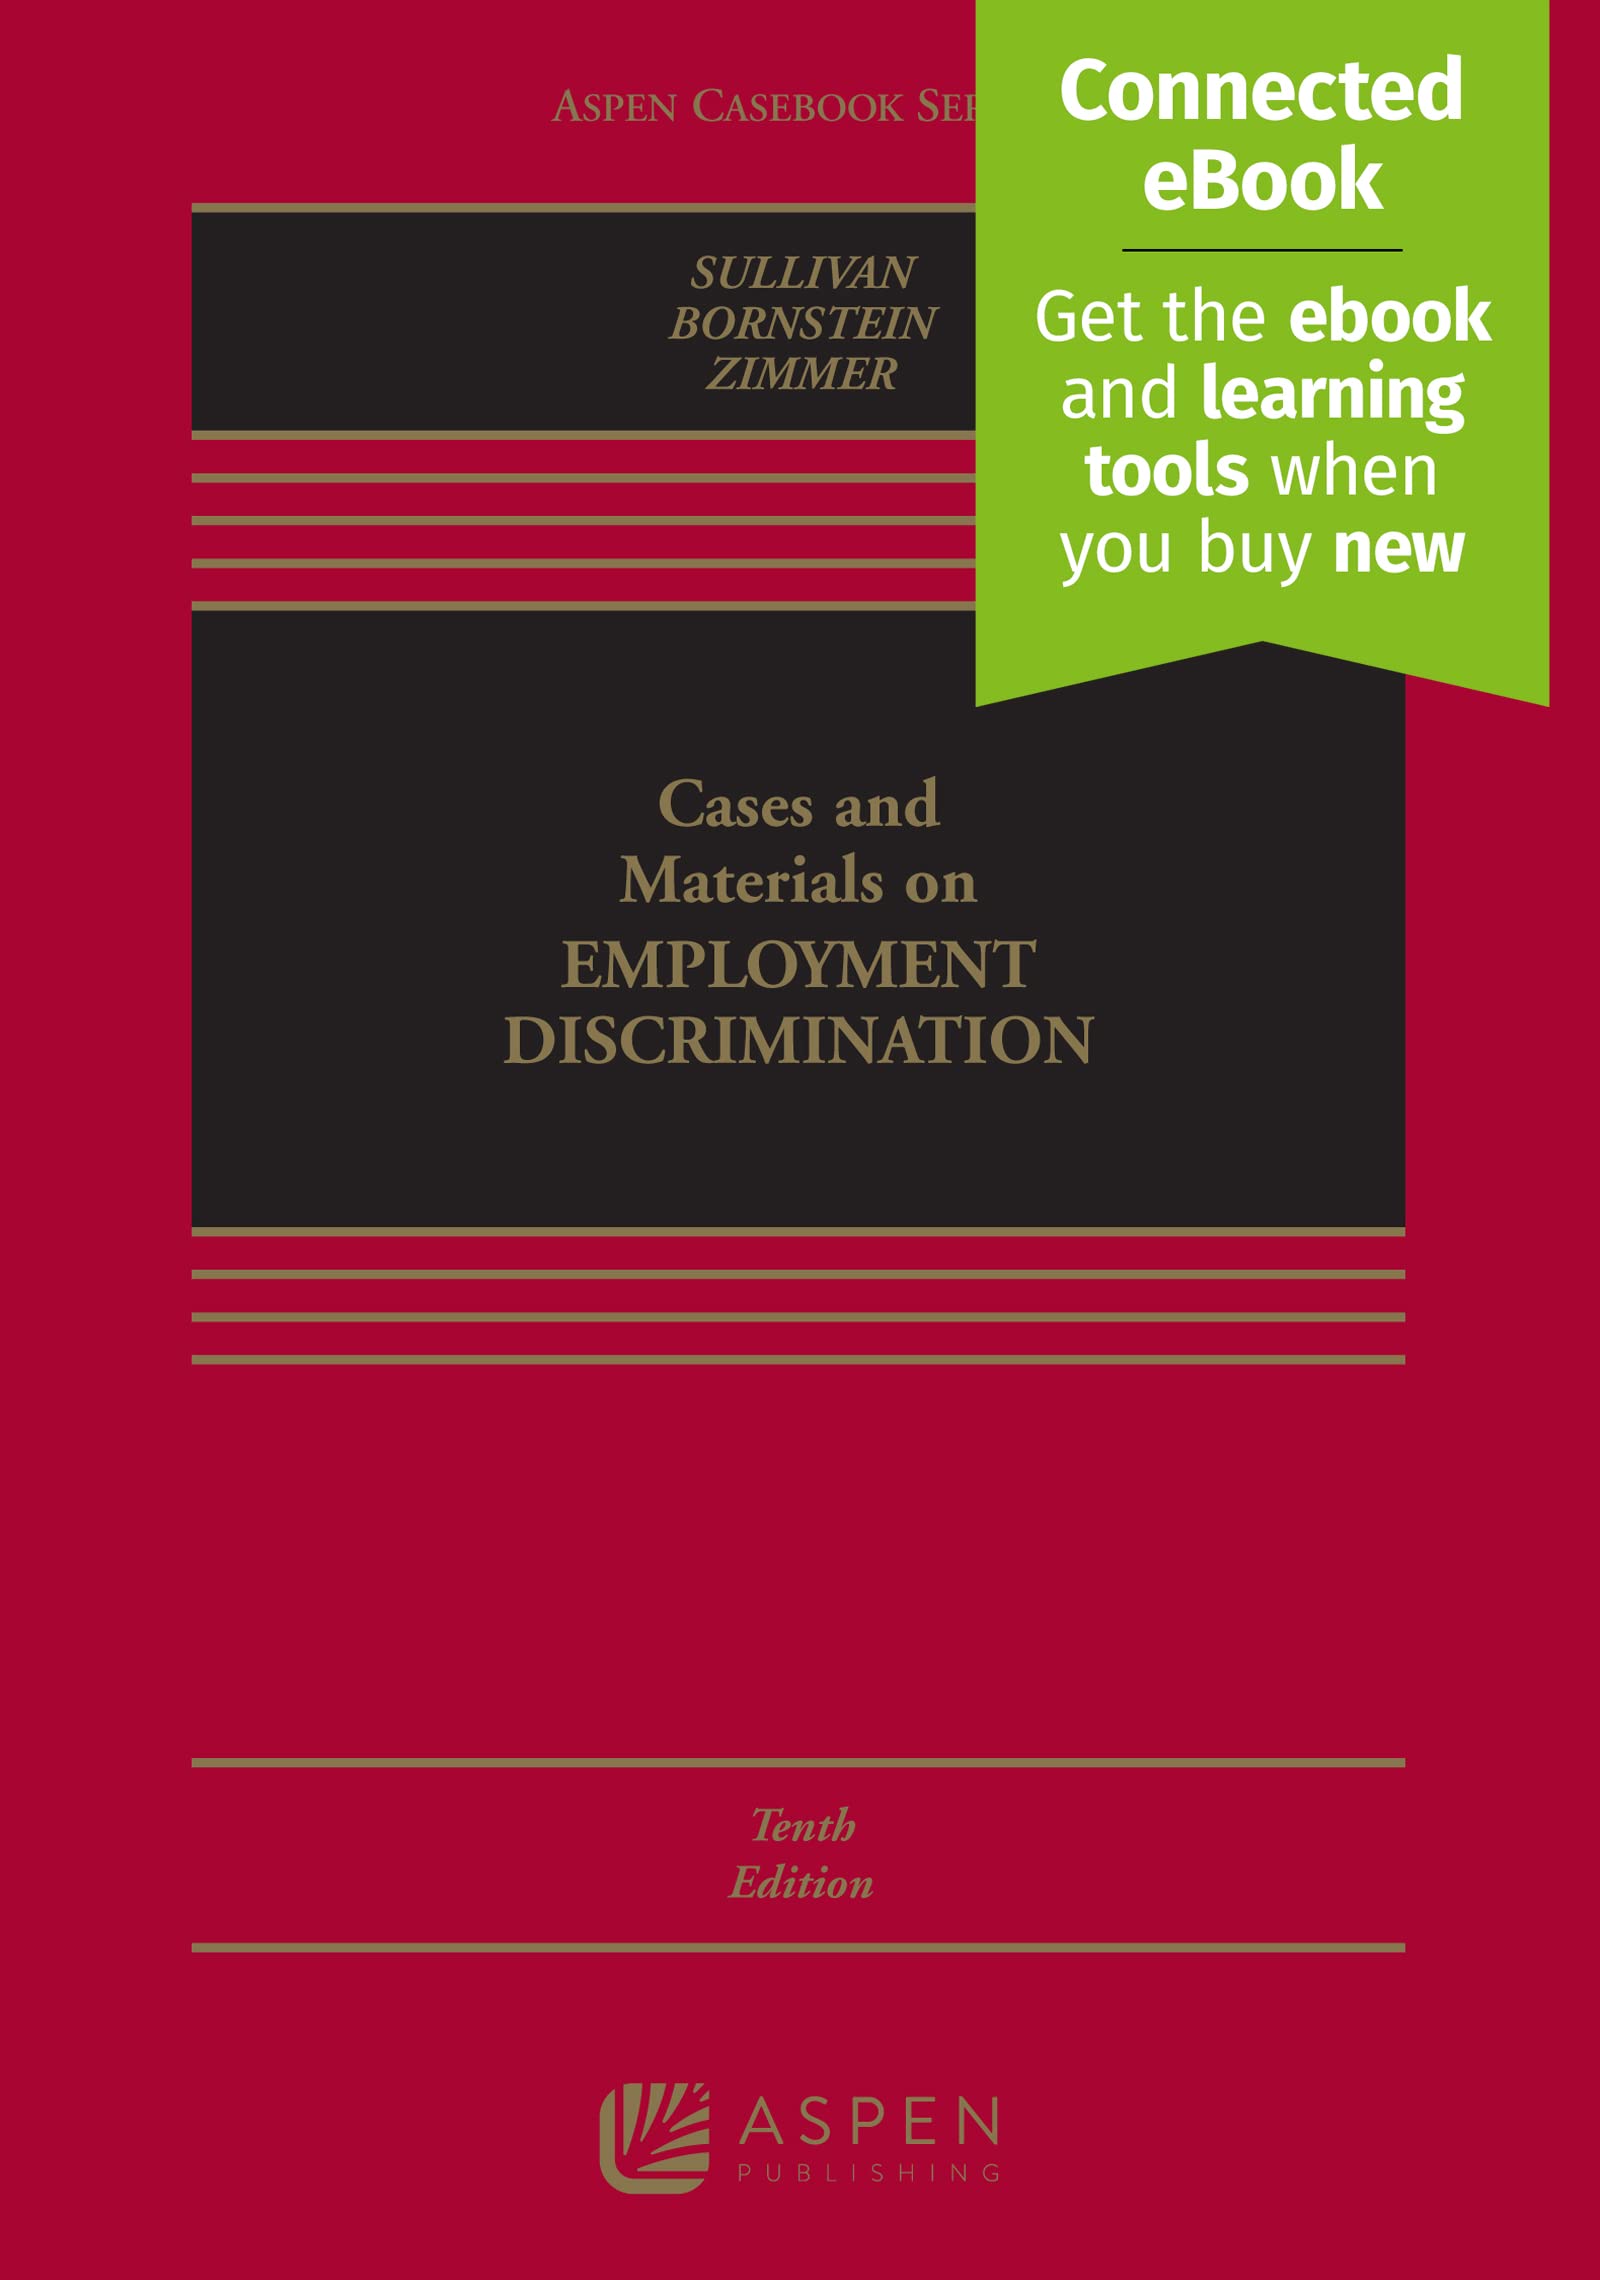 Cases and Materials on Employment Discrimination [Connected eBook] (Aspen Casebook)